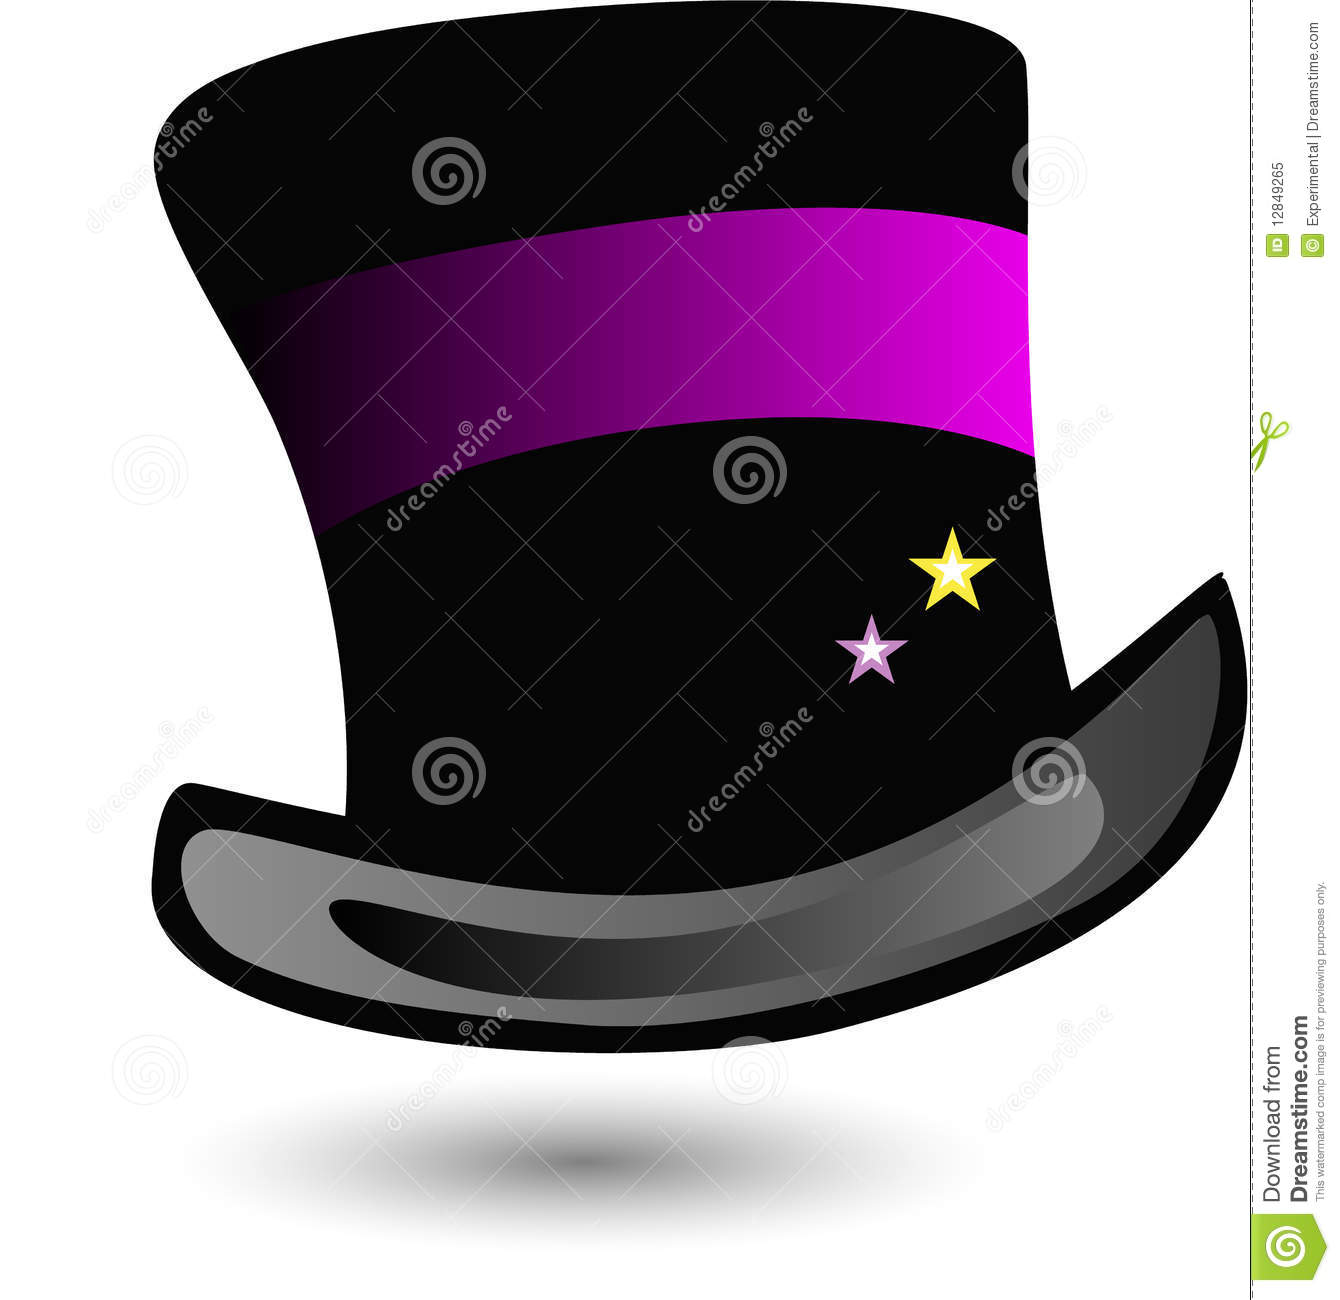 Magic Hat Icon In Black And Purple Colors With Stars HD Walls Find